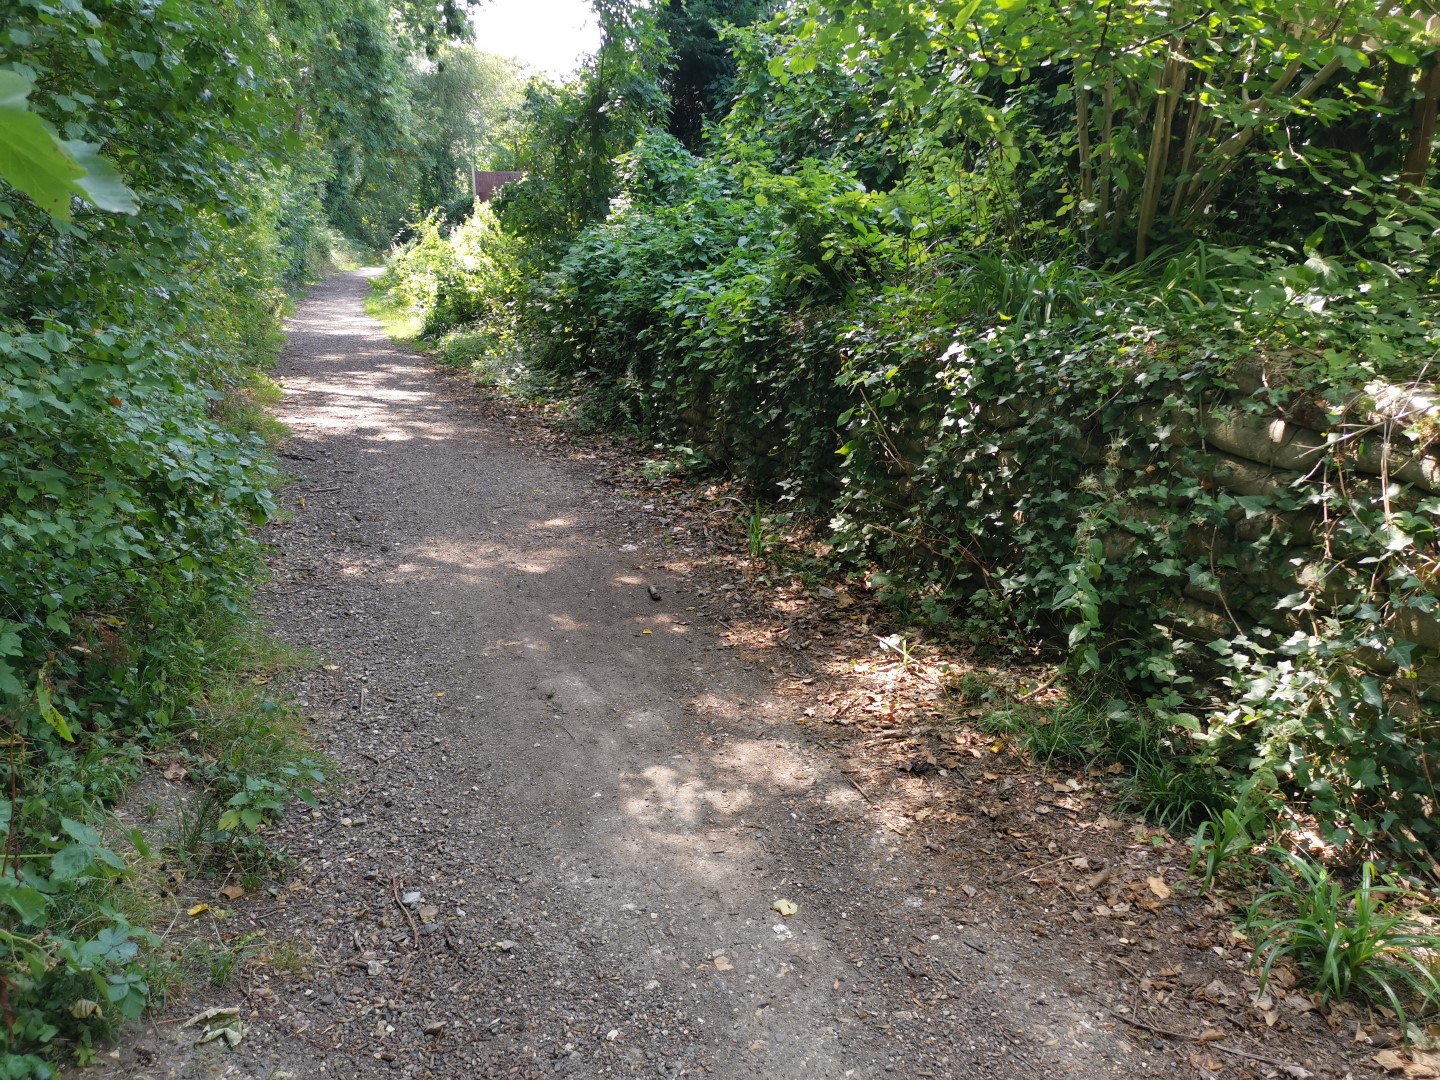 rough gravelly cycle track bordered by overgrown hedges on either side